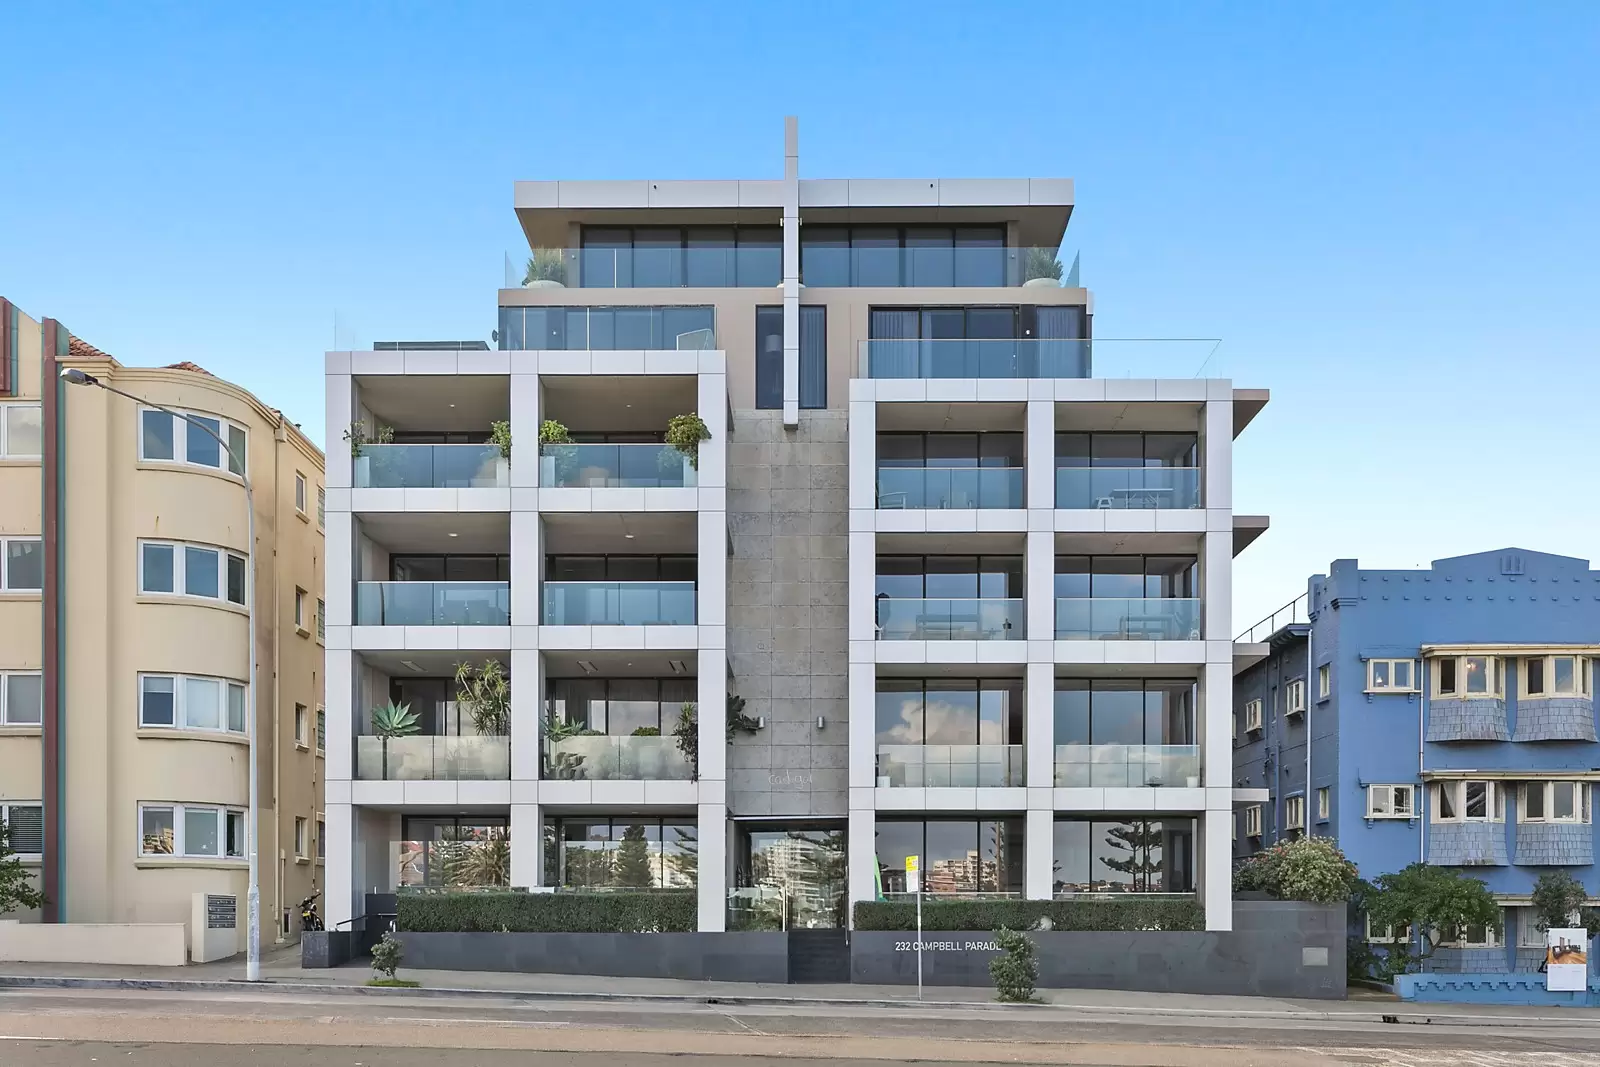 13/232 Campbell Parade, Bondi Beach Leased by Sydney Sotheby's International Realty - image 11